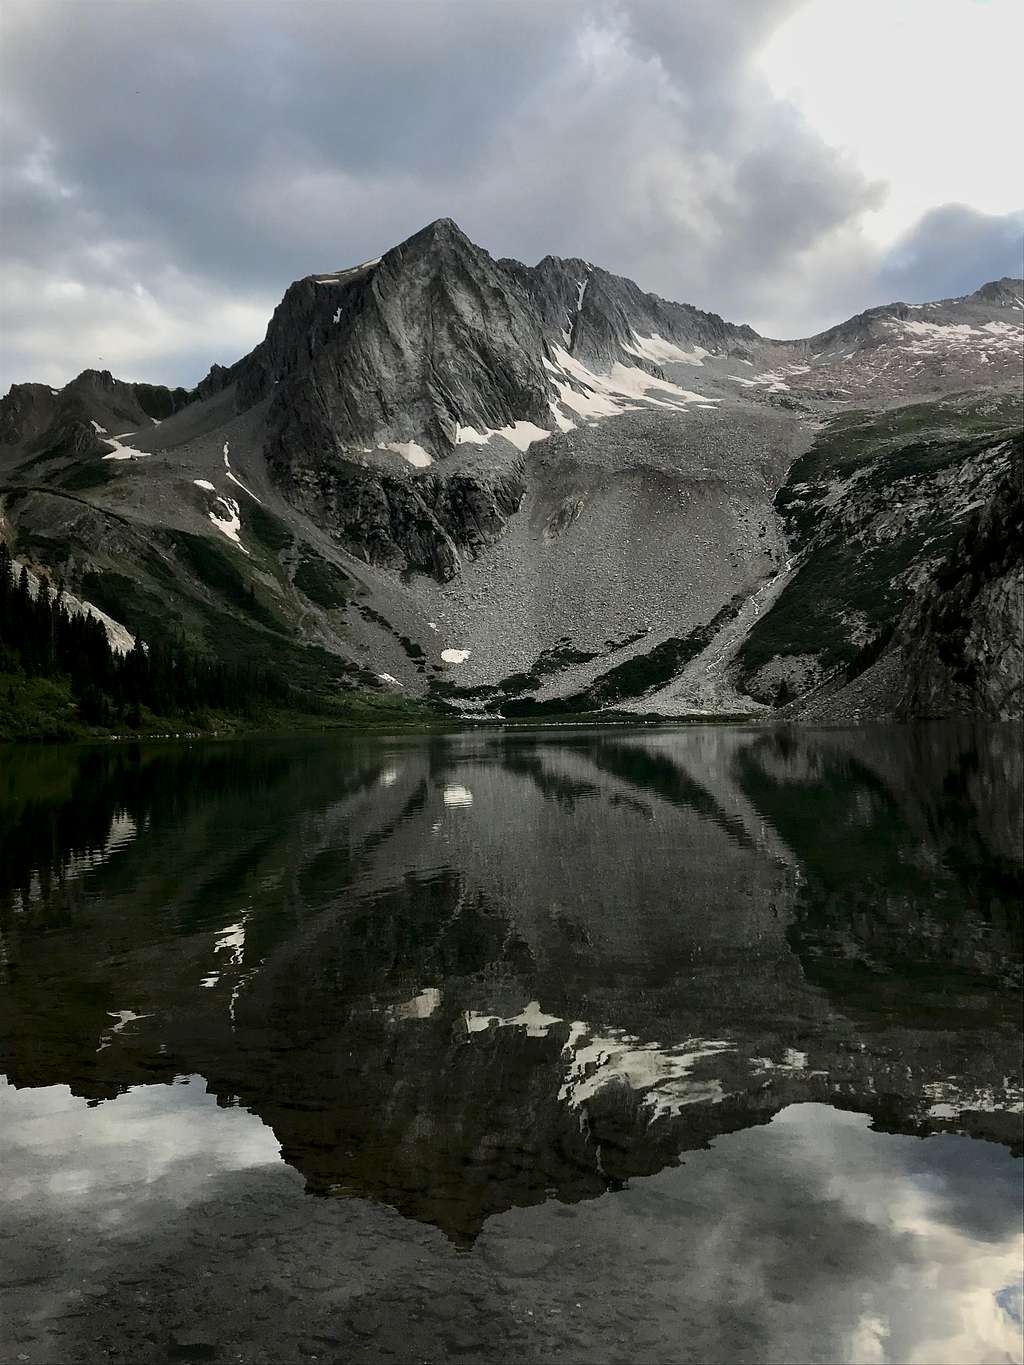 View of Hagerman Peak from Snowmass Lake